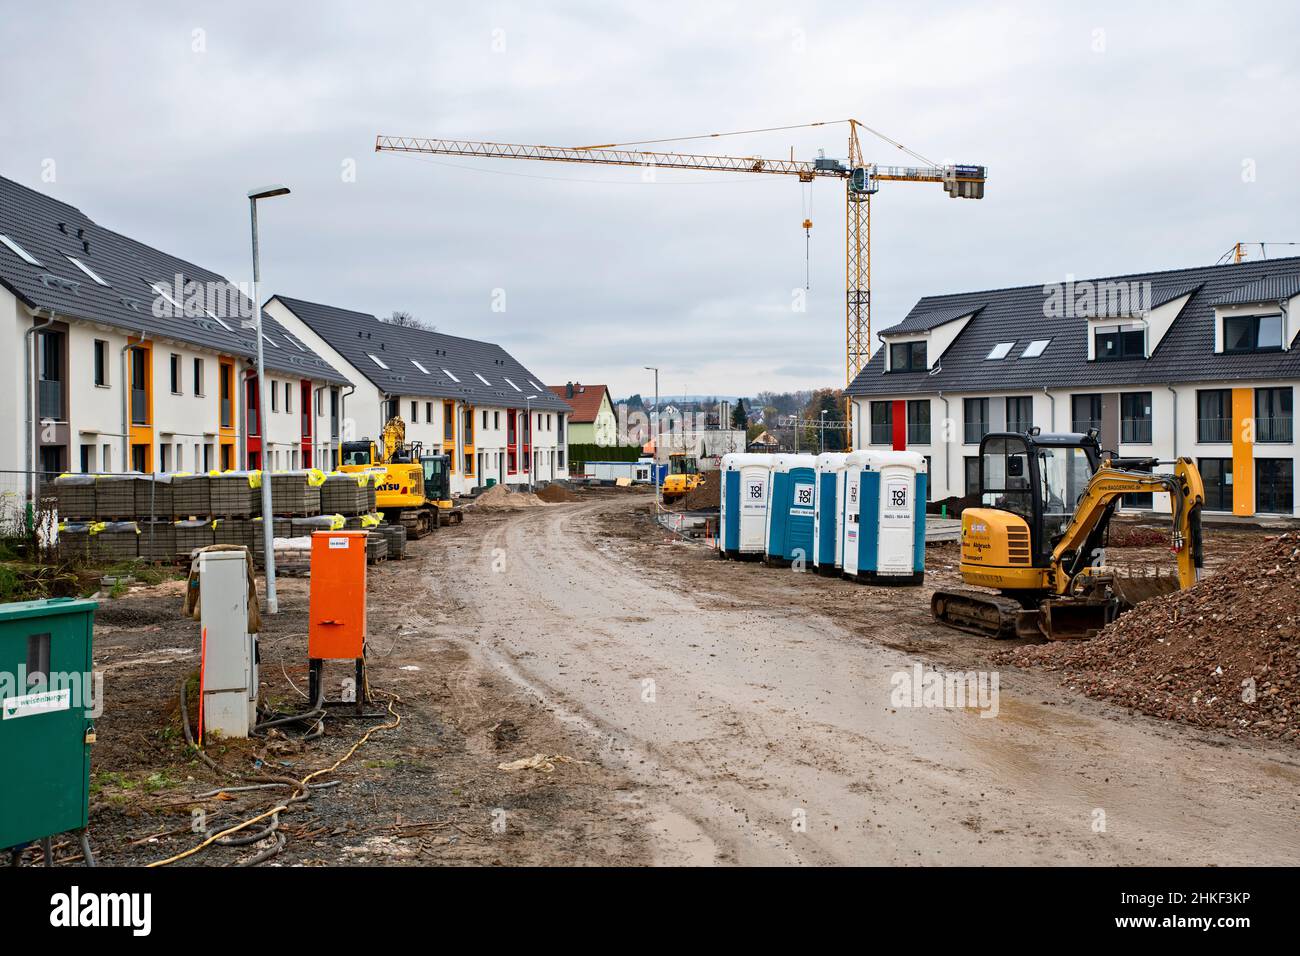 New development area with terraced houses in the Ober-Erlenbach district of Bad Homburg Stock Photo